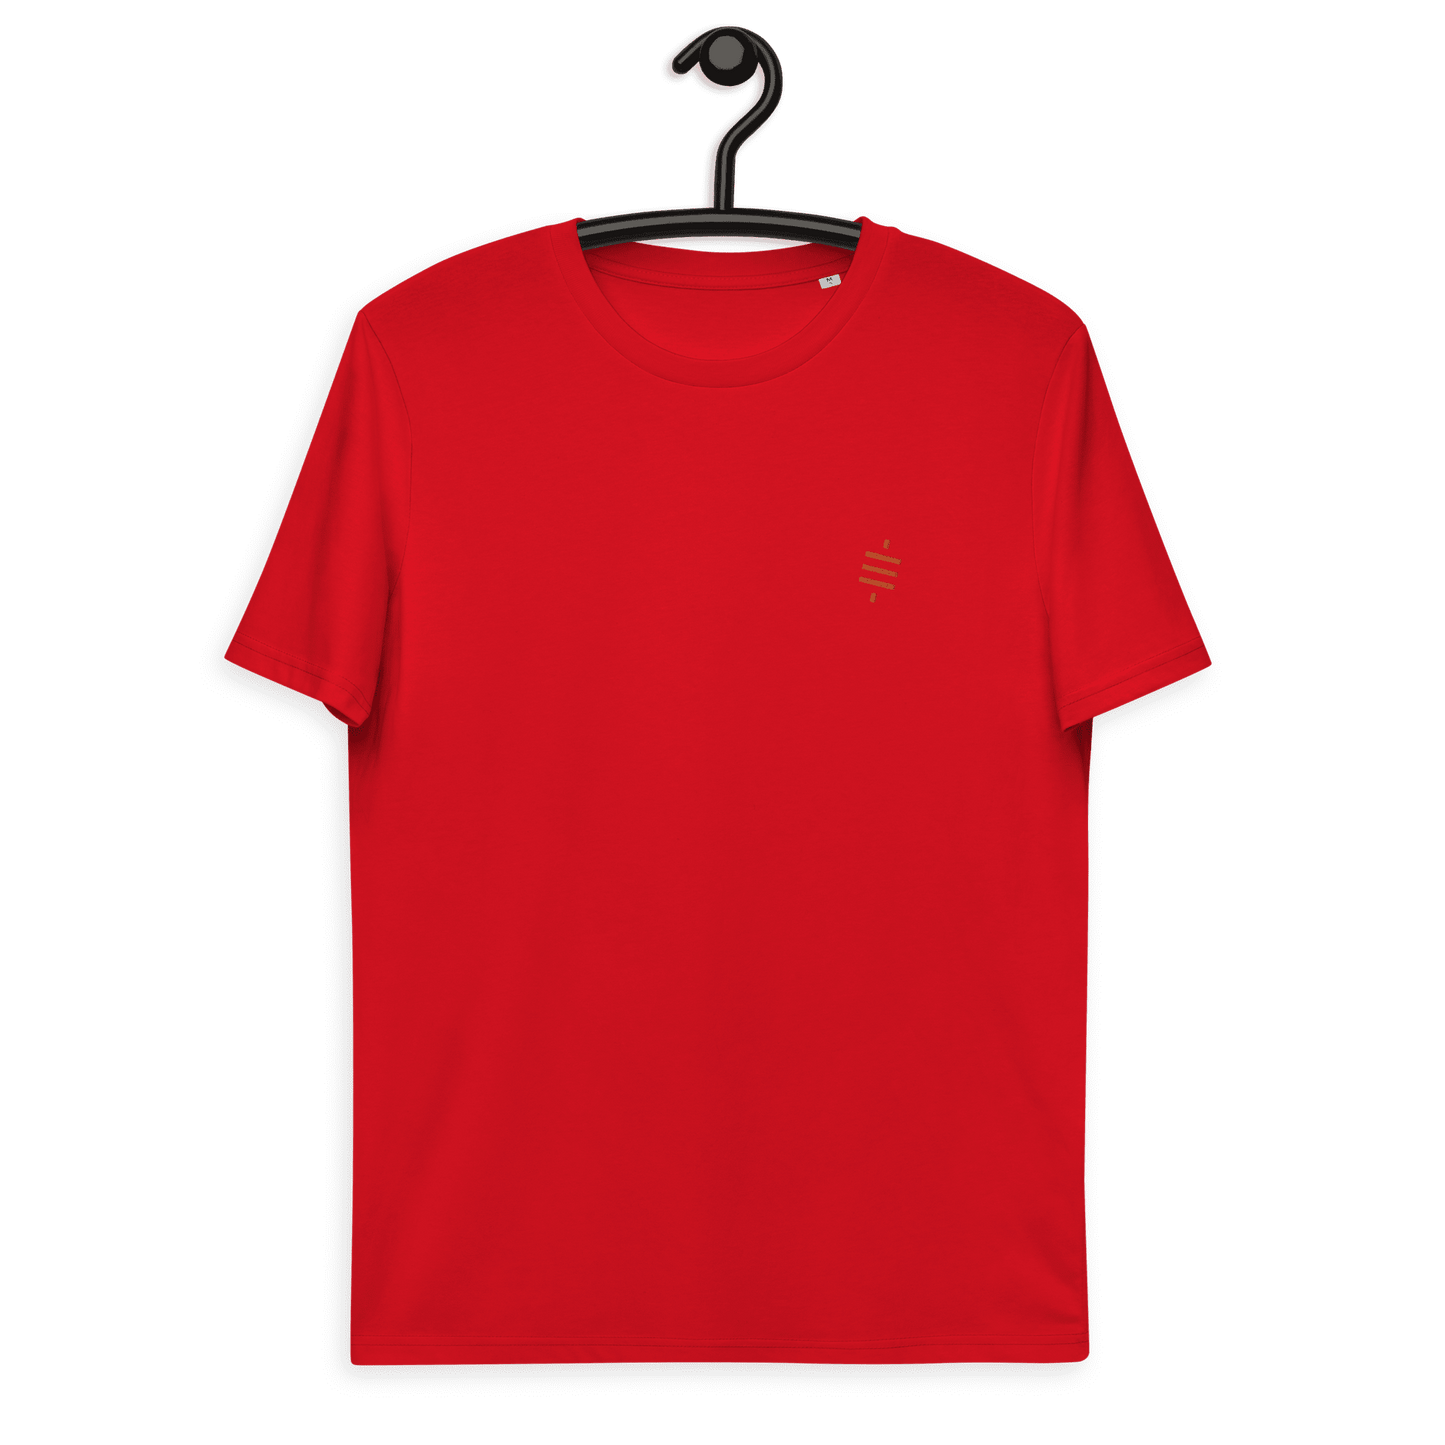 Front view of a red embroidered bitcoin t-shirt.